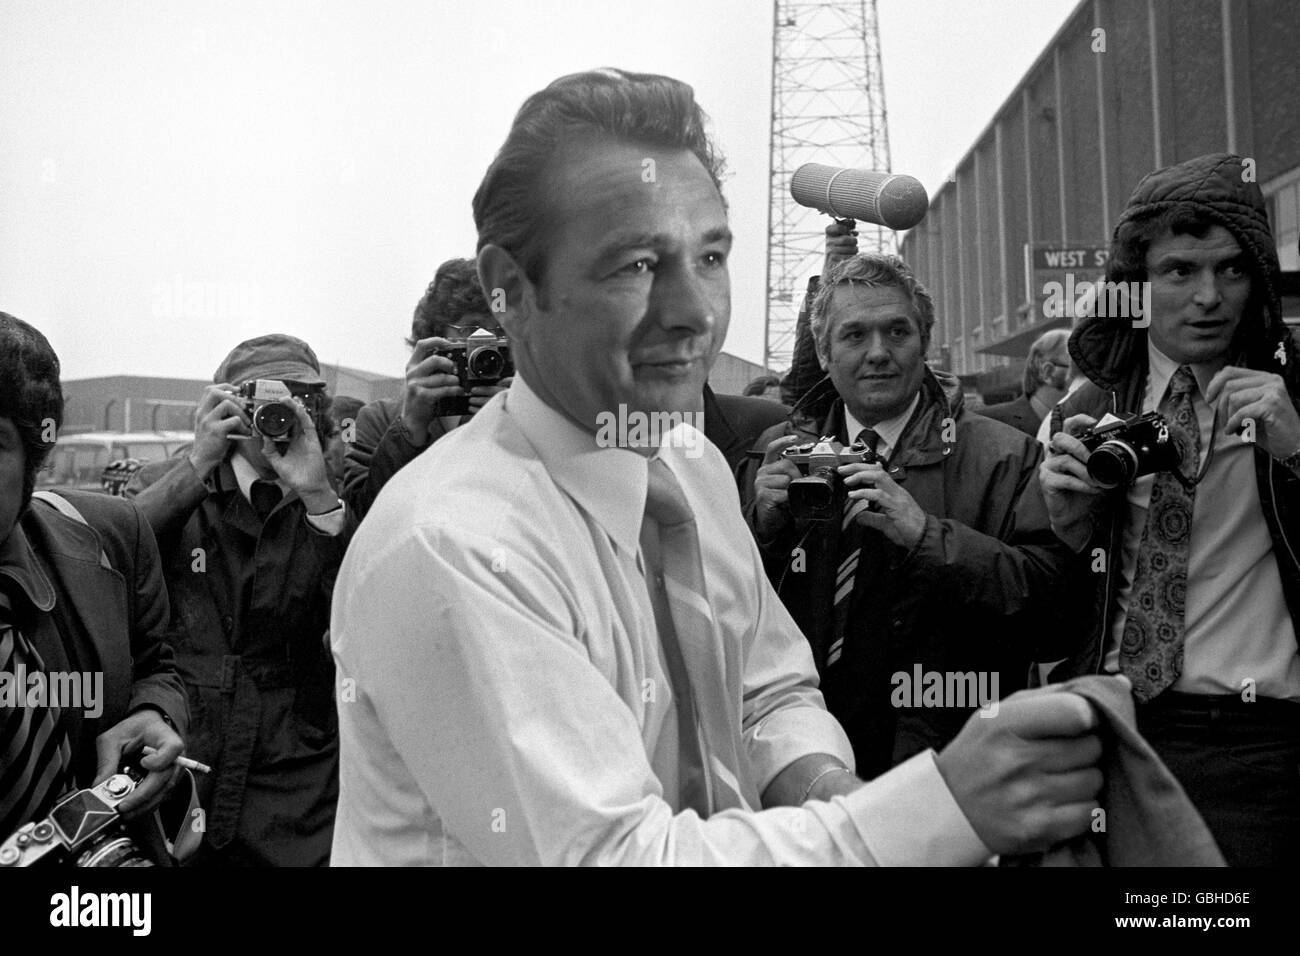 Brian Clough is surrounded by photographers and enthusiastic fans as he arrives at Elland Road to begin his tenure as Leeds United Manager. Stock Photo